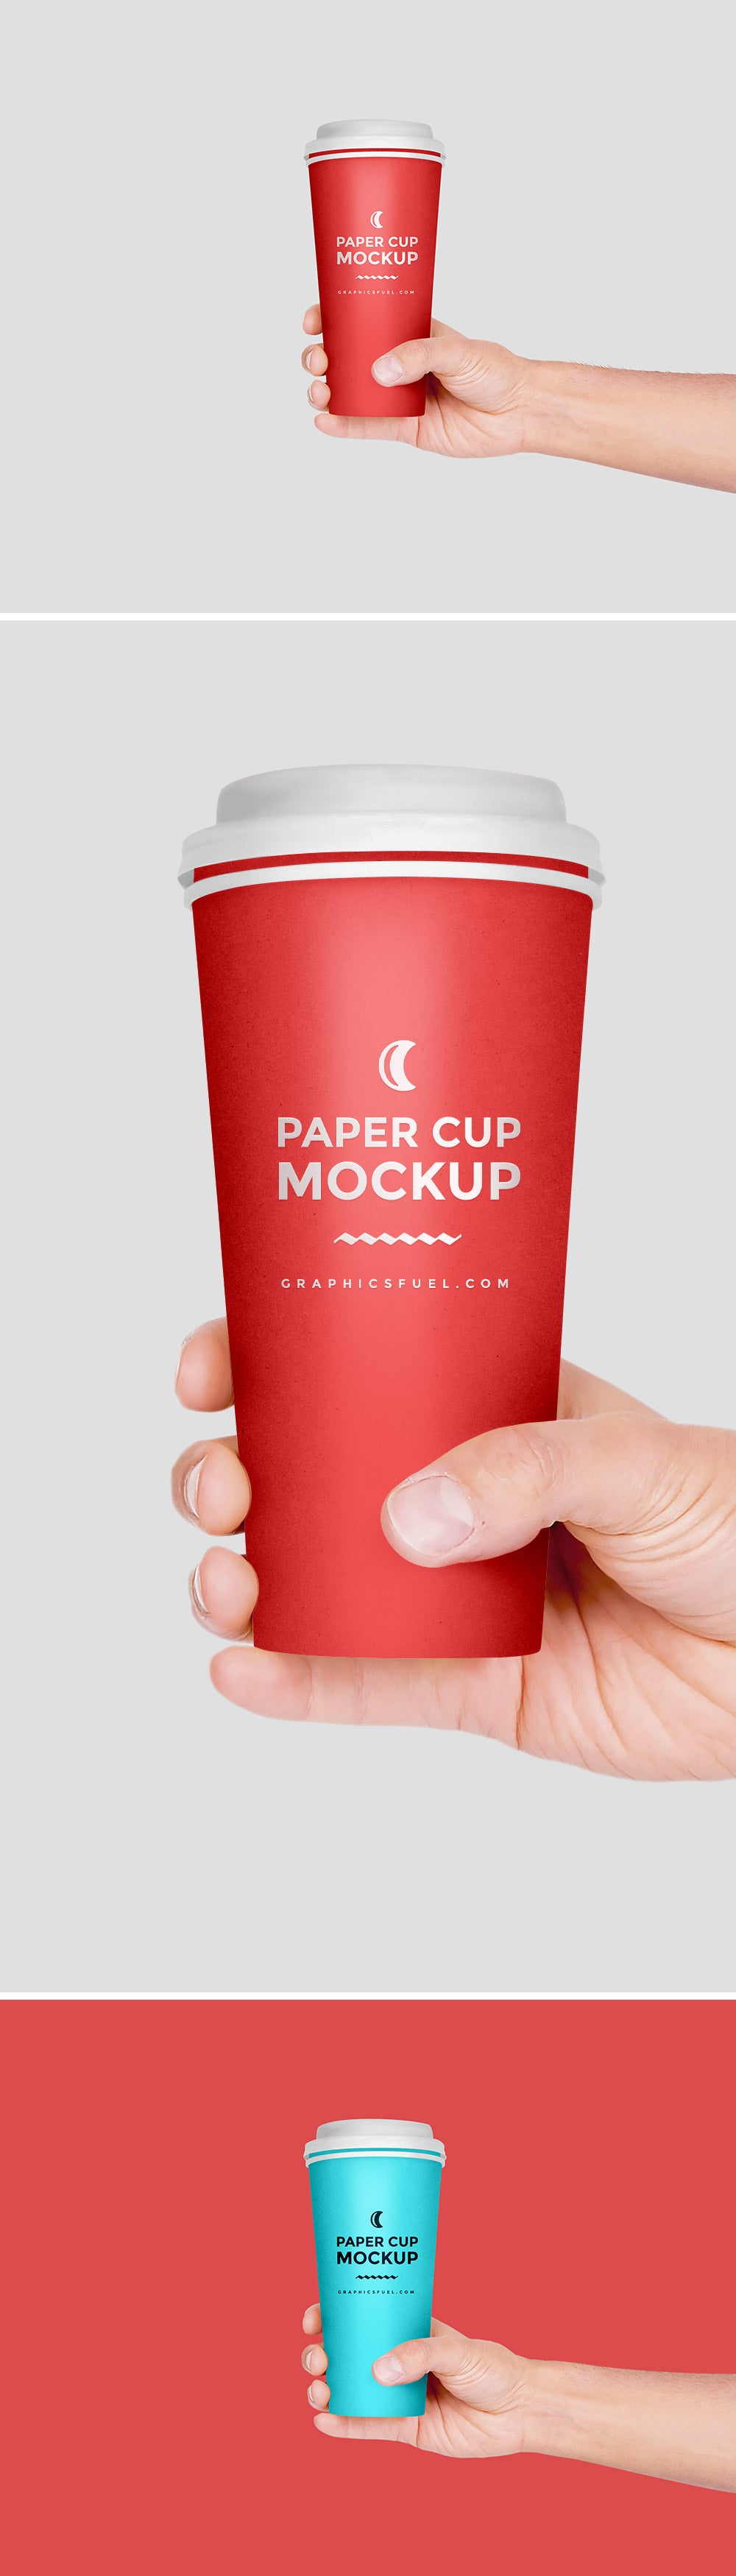 Free Paper Cup In Hand Mockup PSD